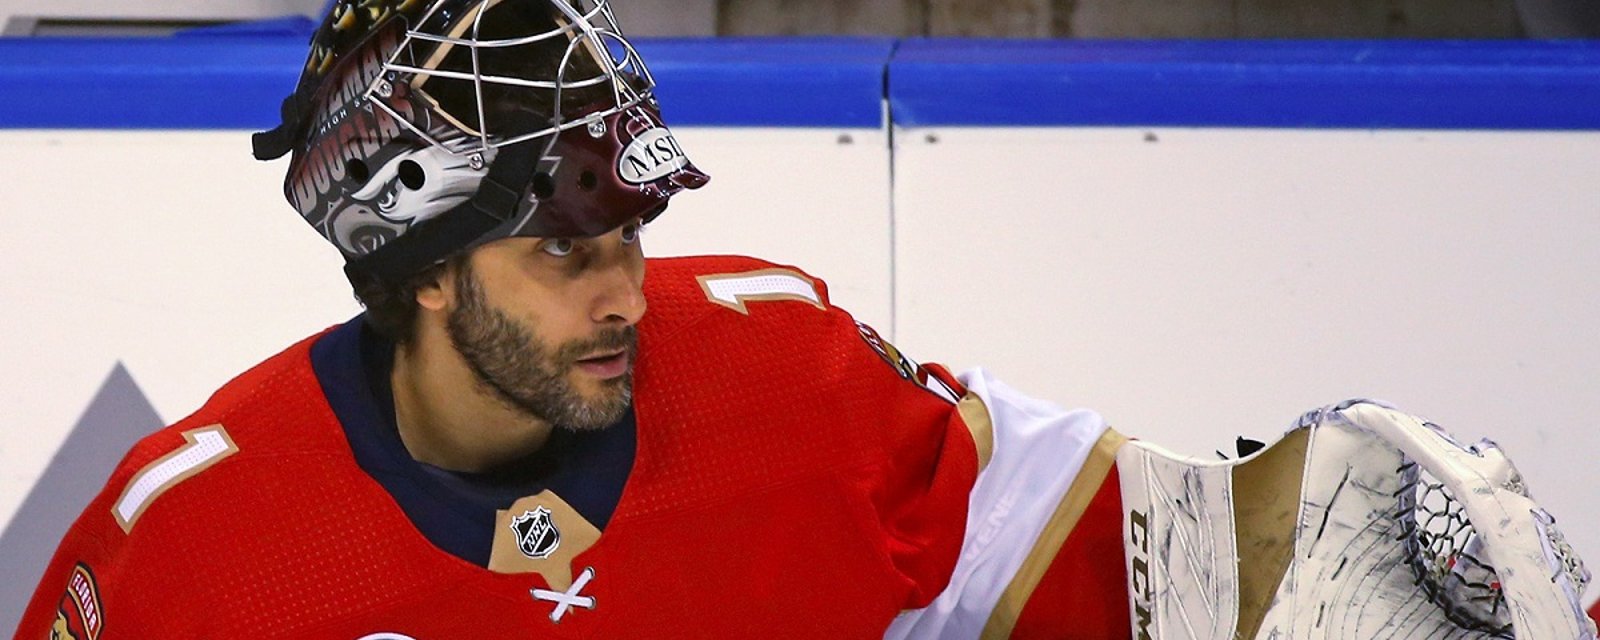 Roberto Luongo refutes comments made by former teammate Kevin Bieksa.